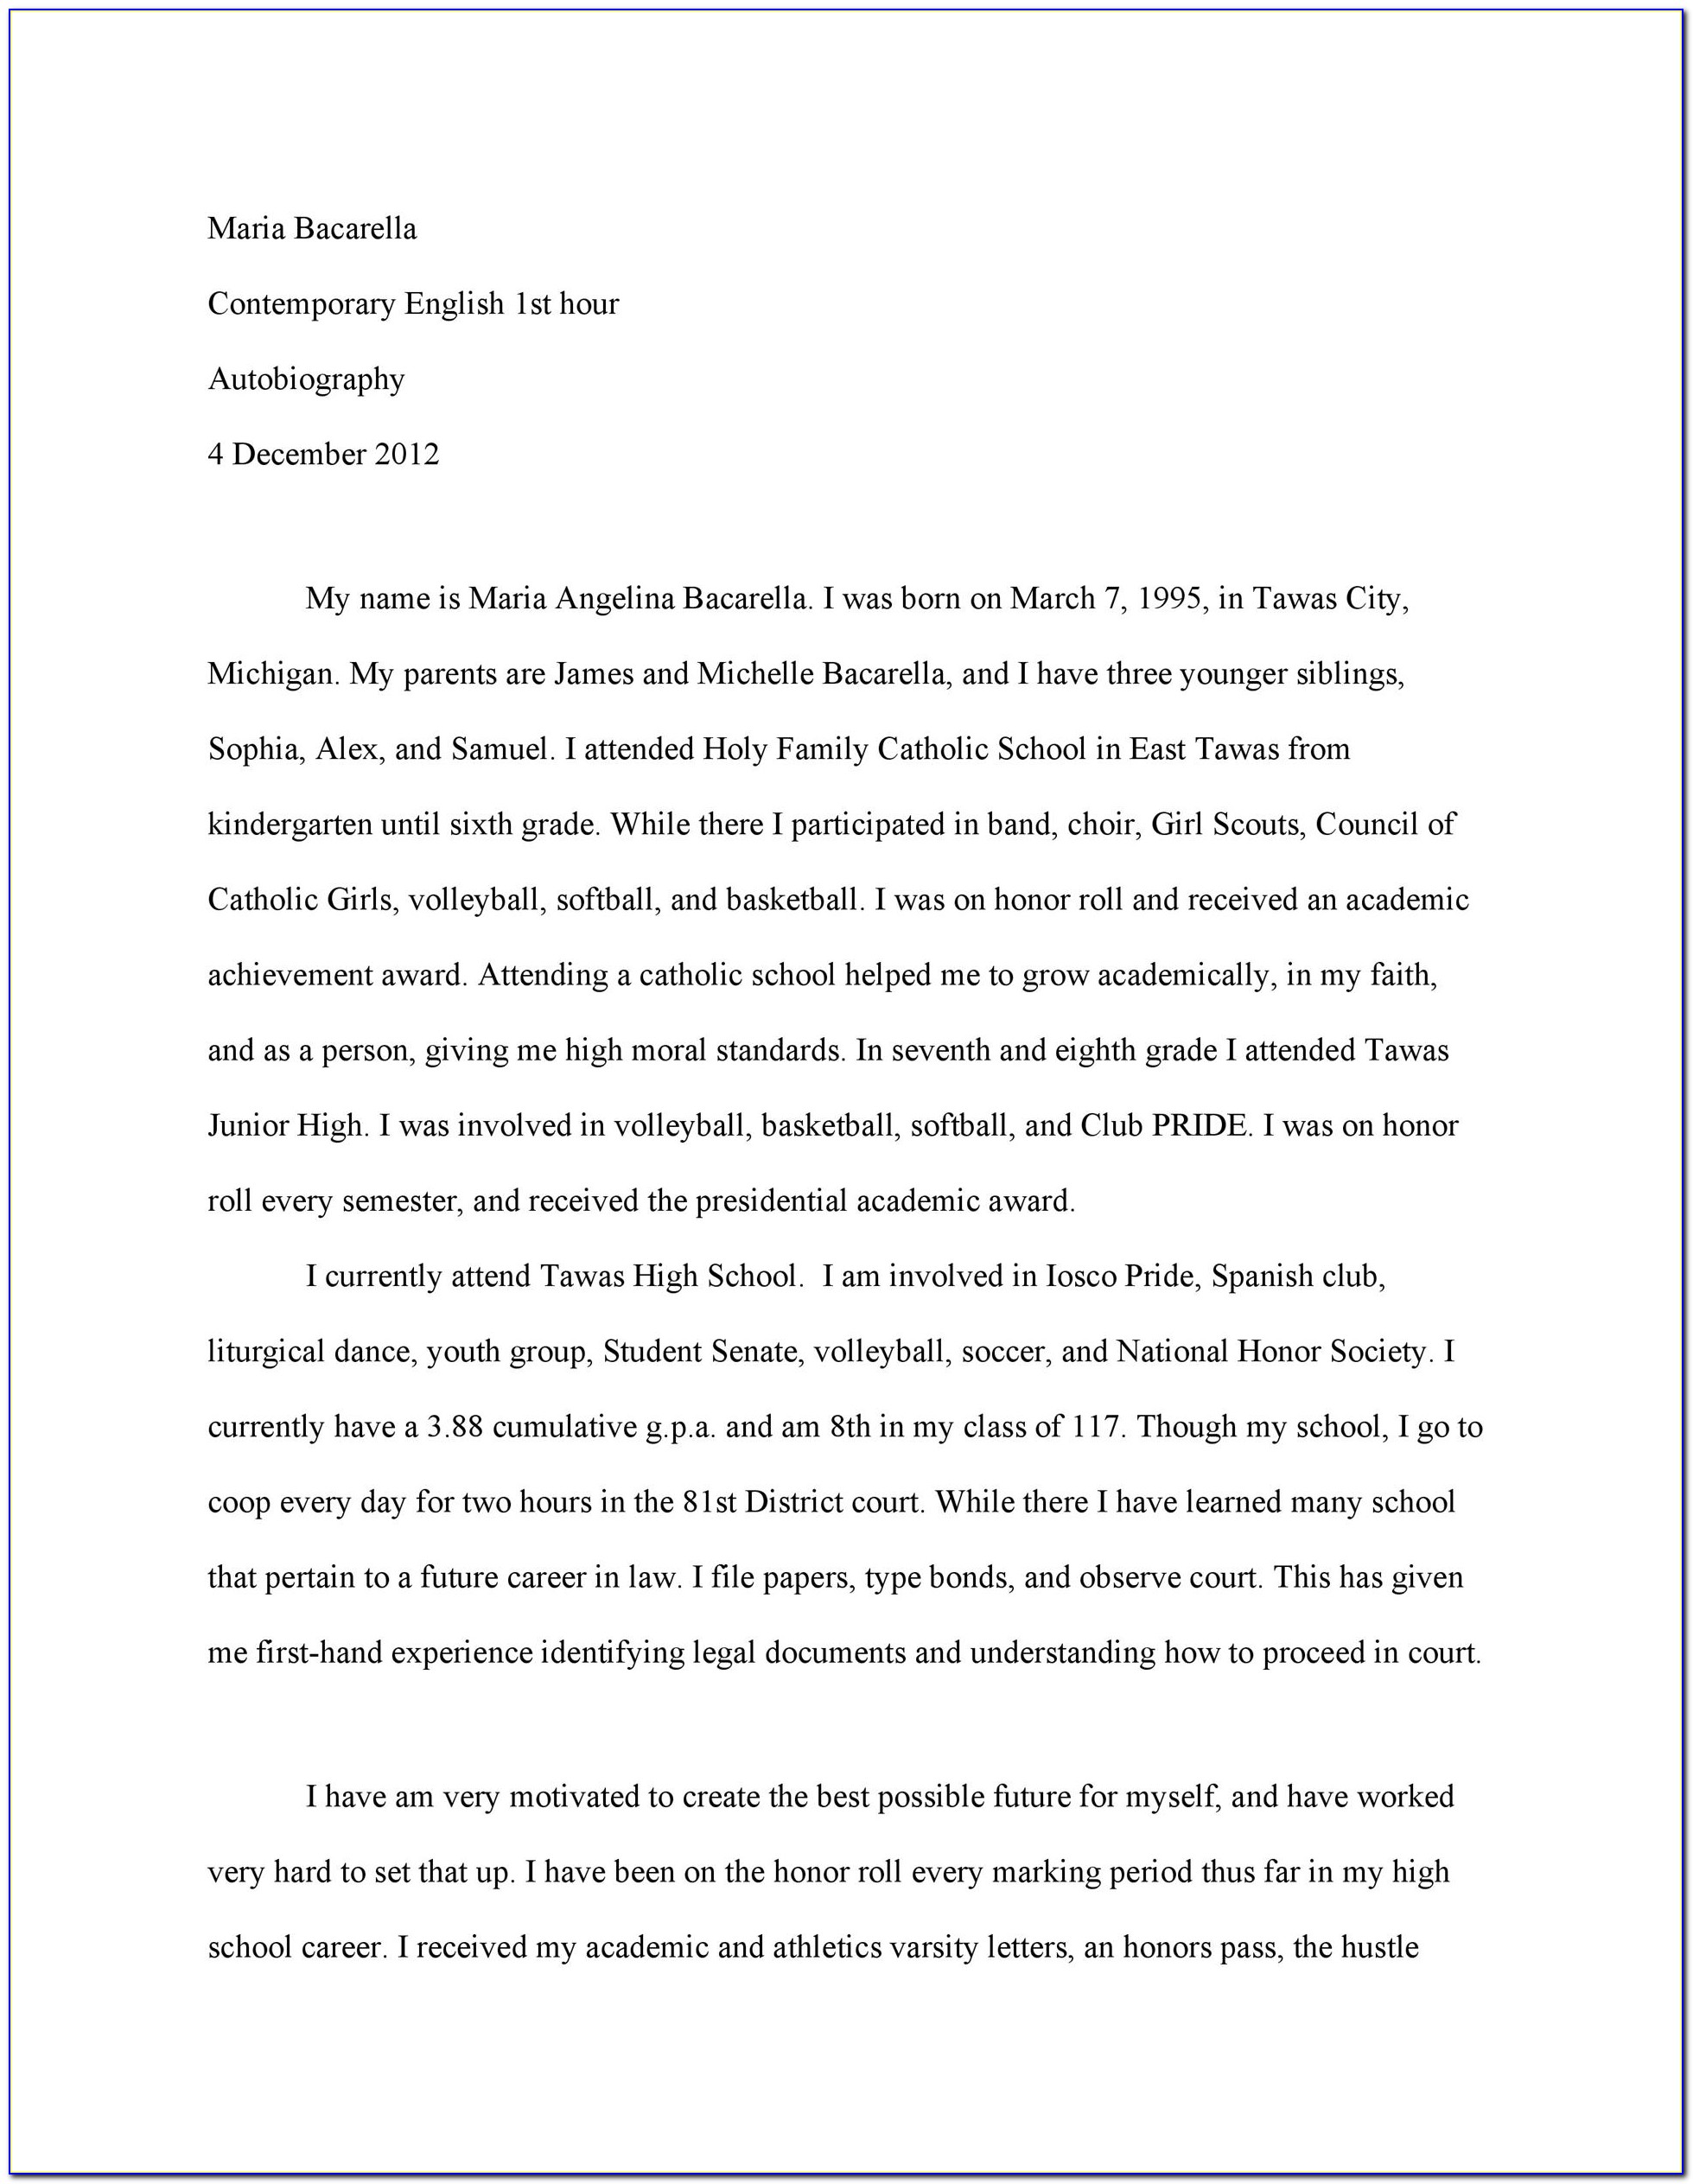 Free Biography Templates For Students